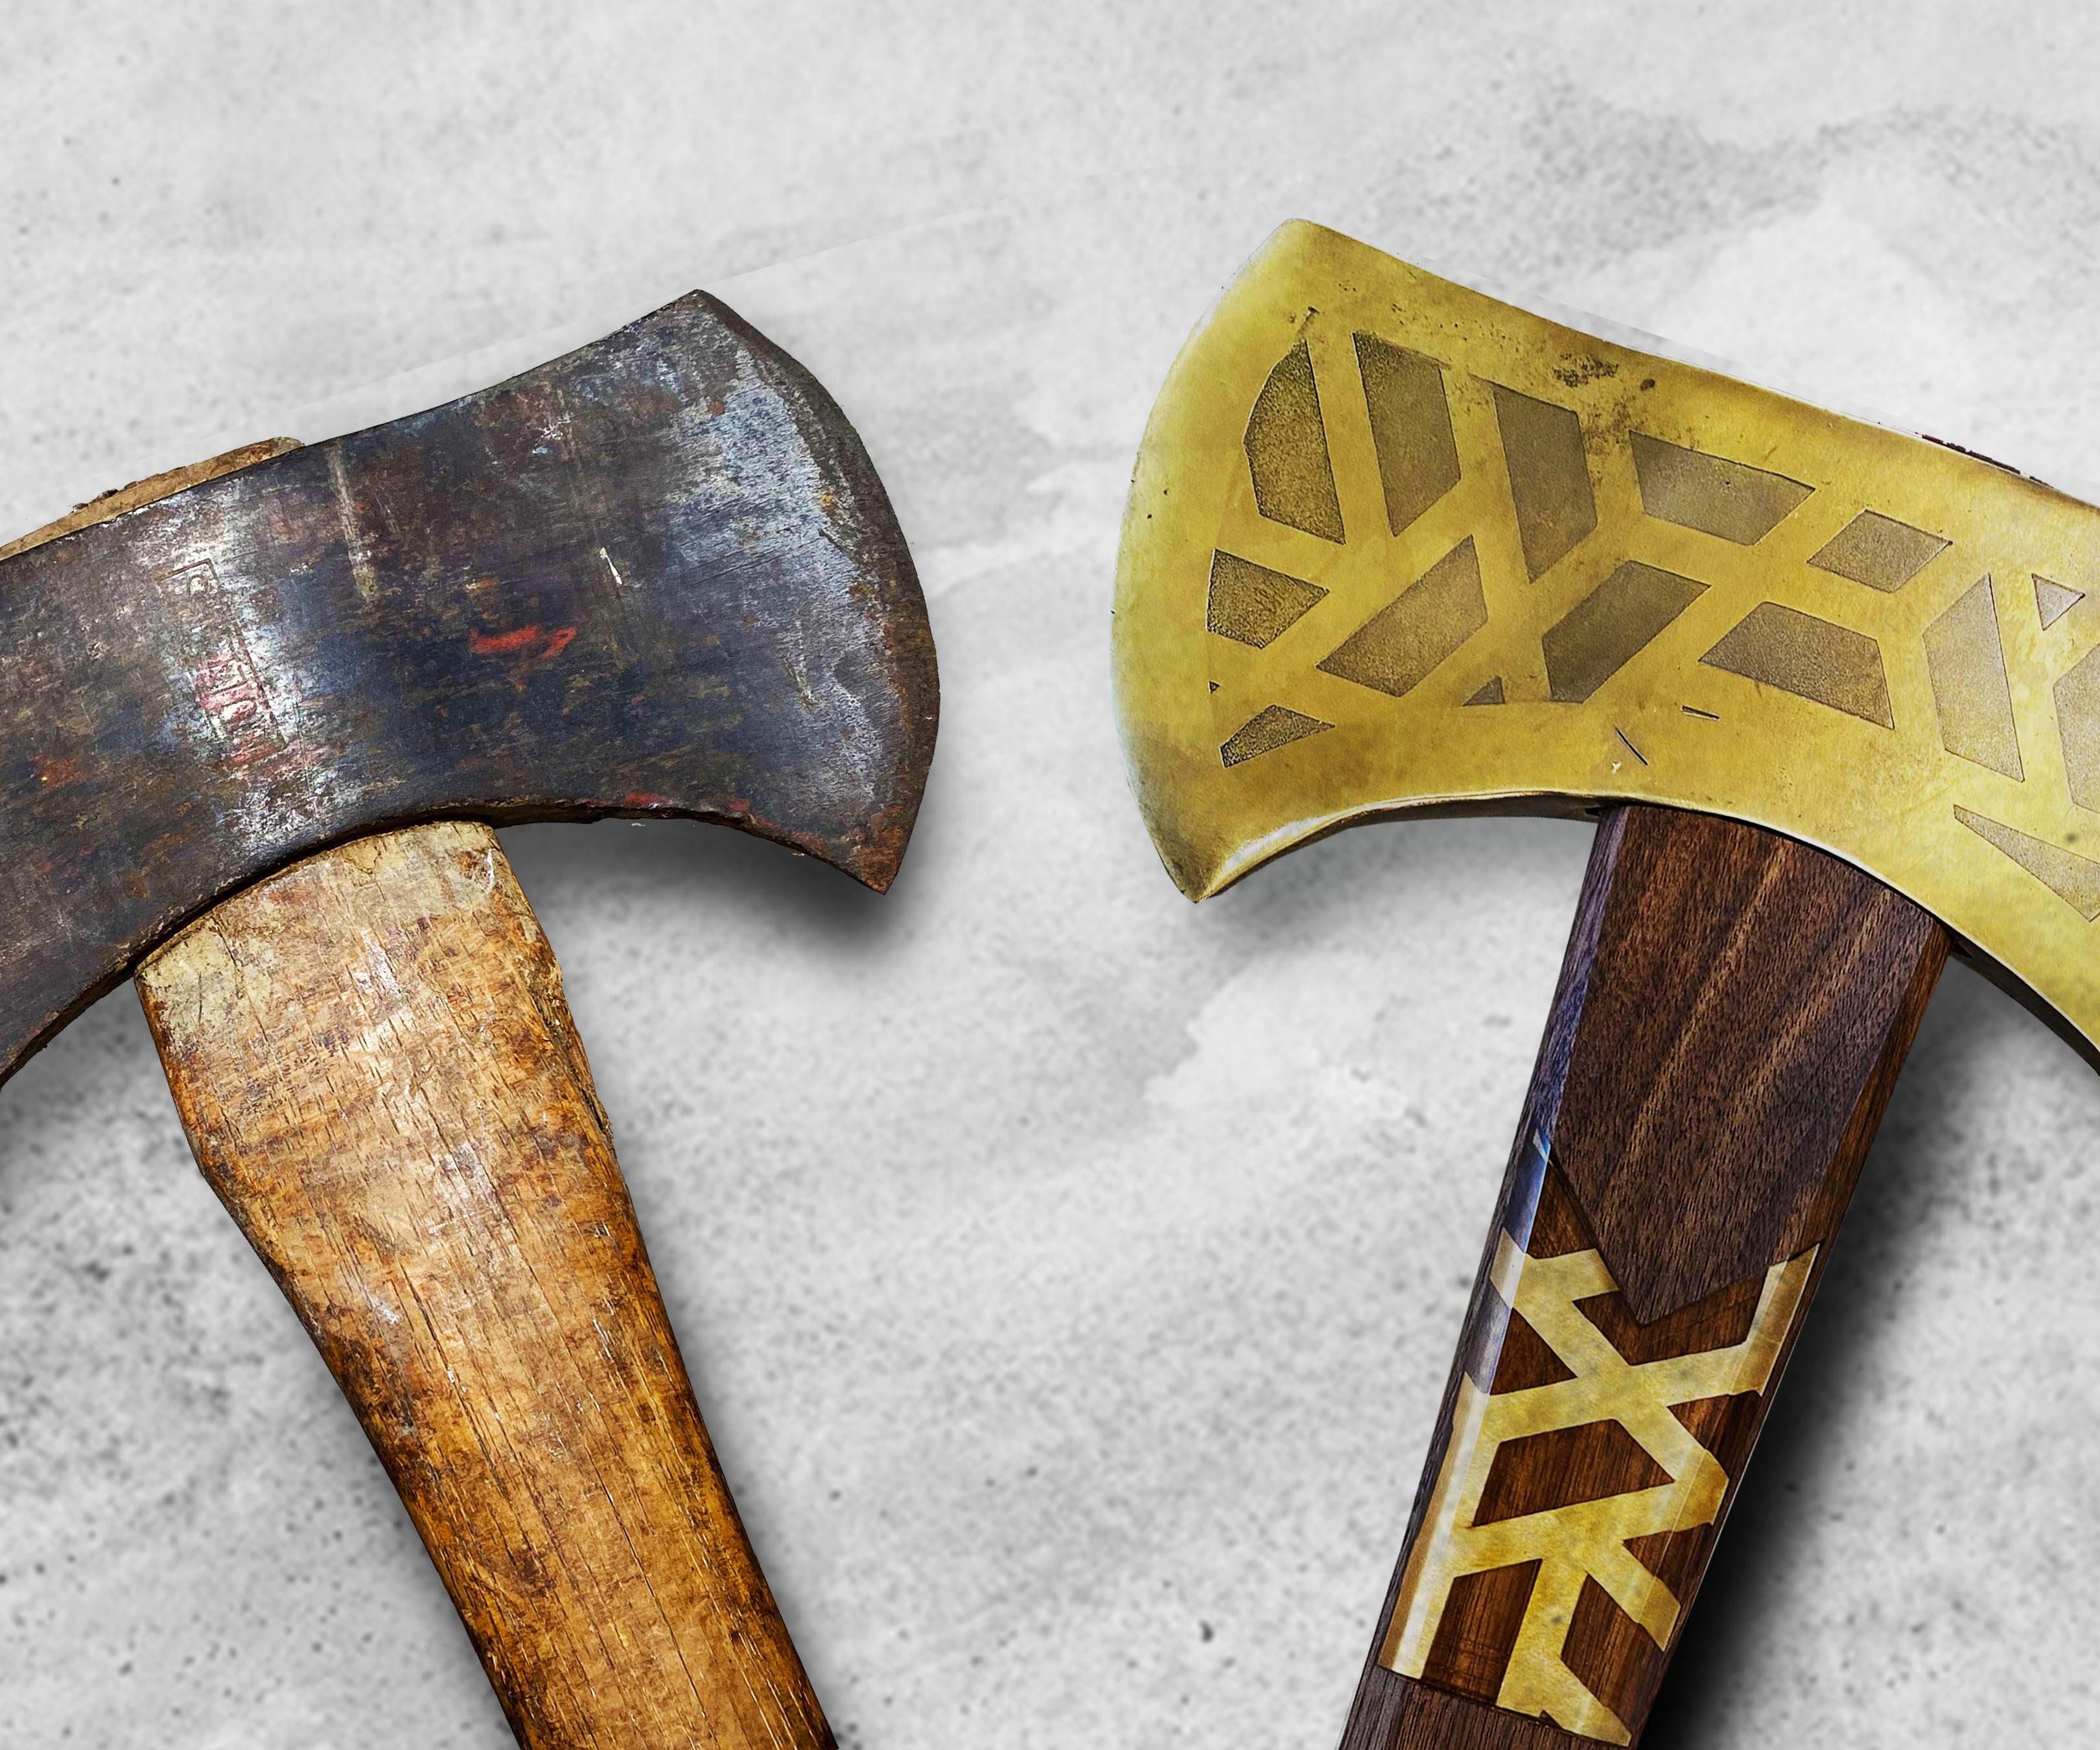 Turning Old Into Gold. Restoration and Modification of a Rusty Axe